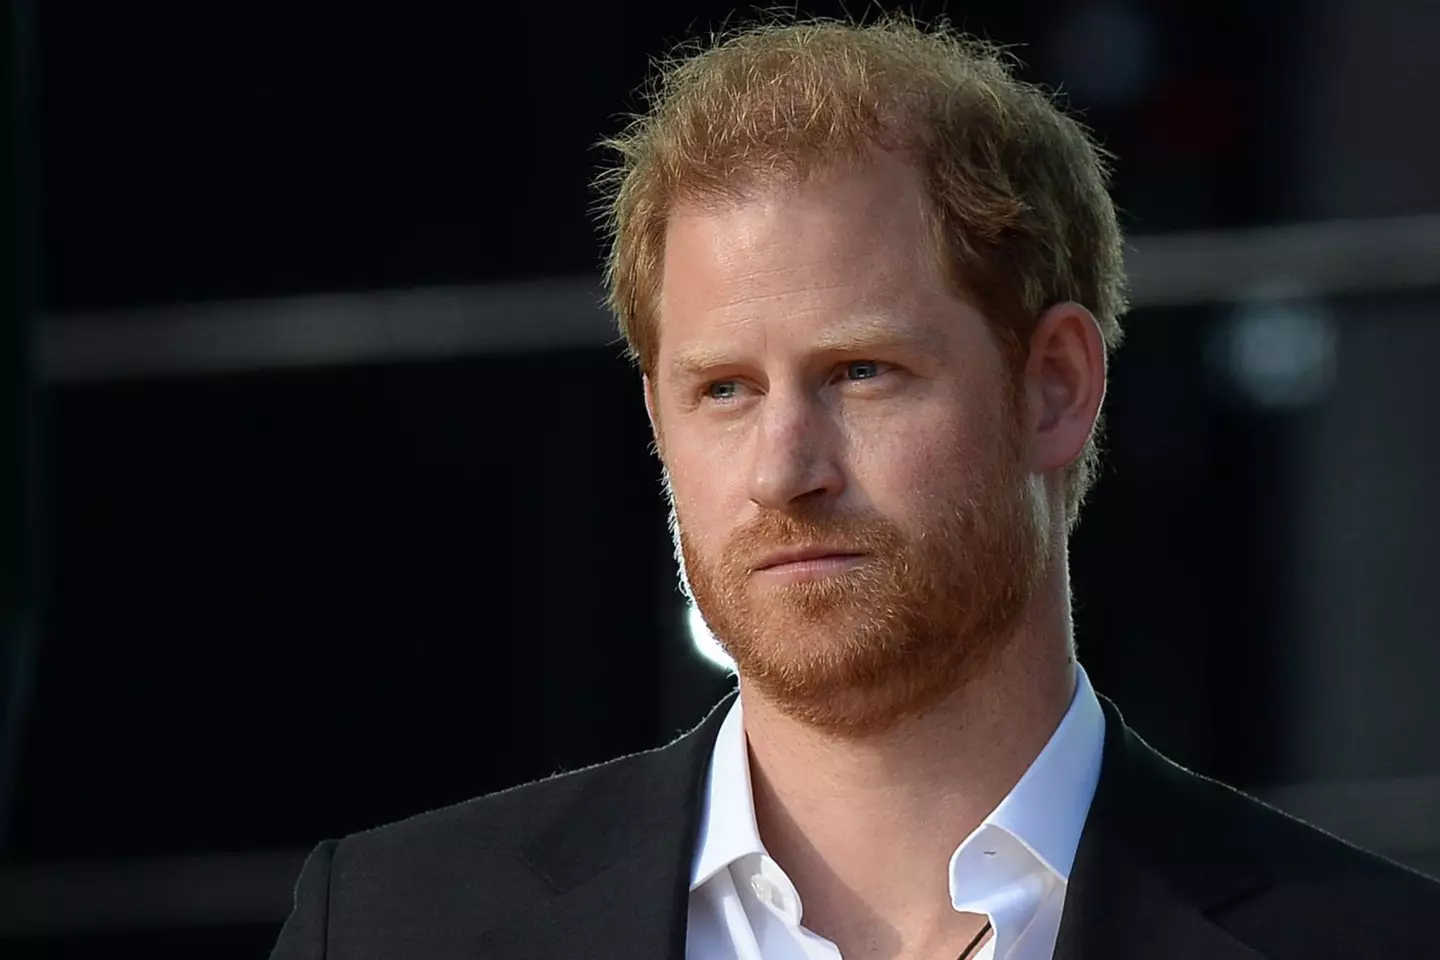 Prince Harry has just released a statement following The Queen's death.